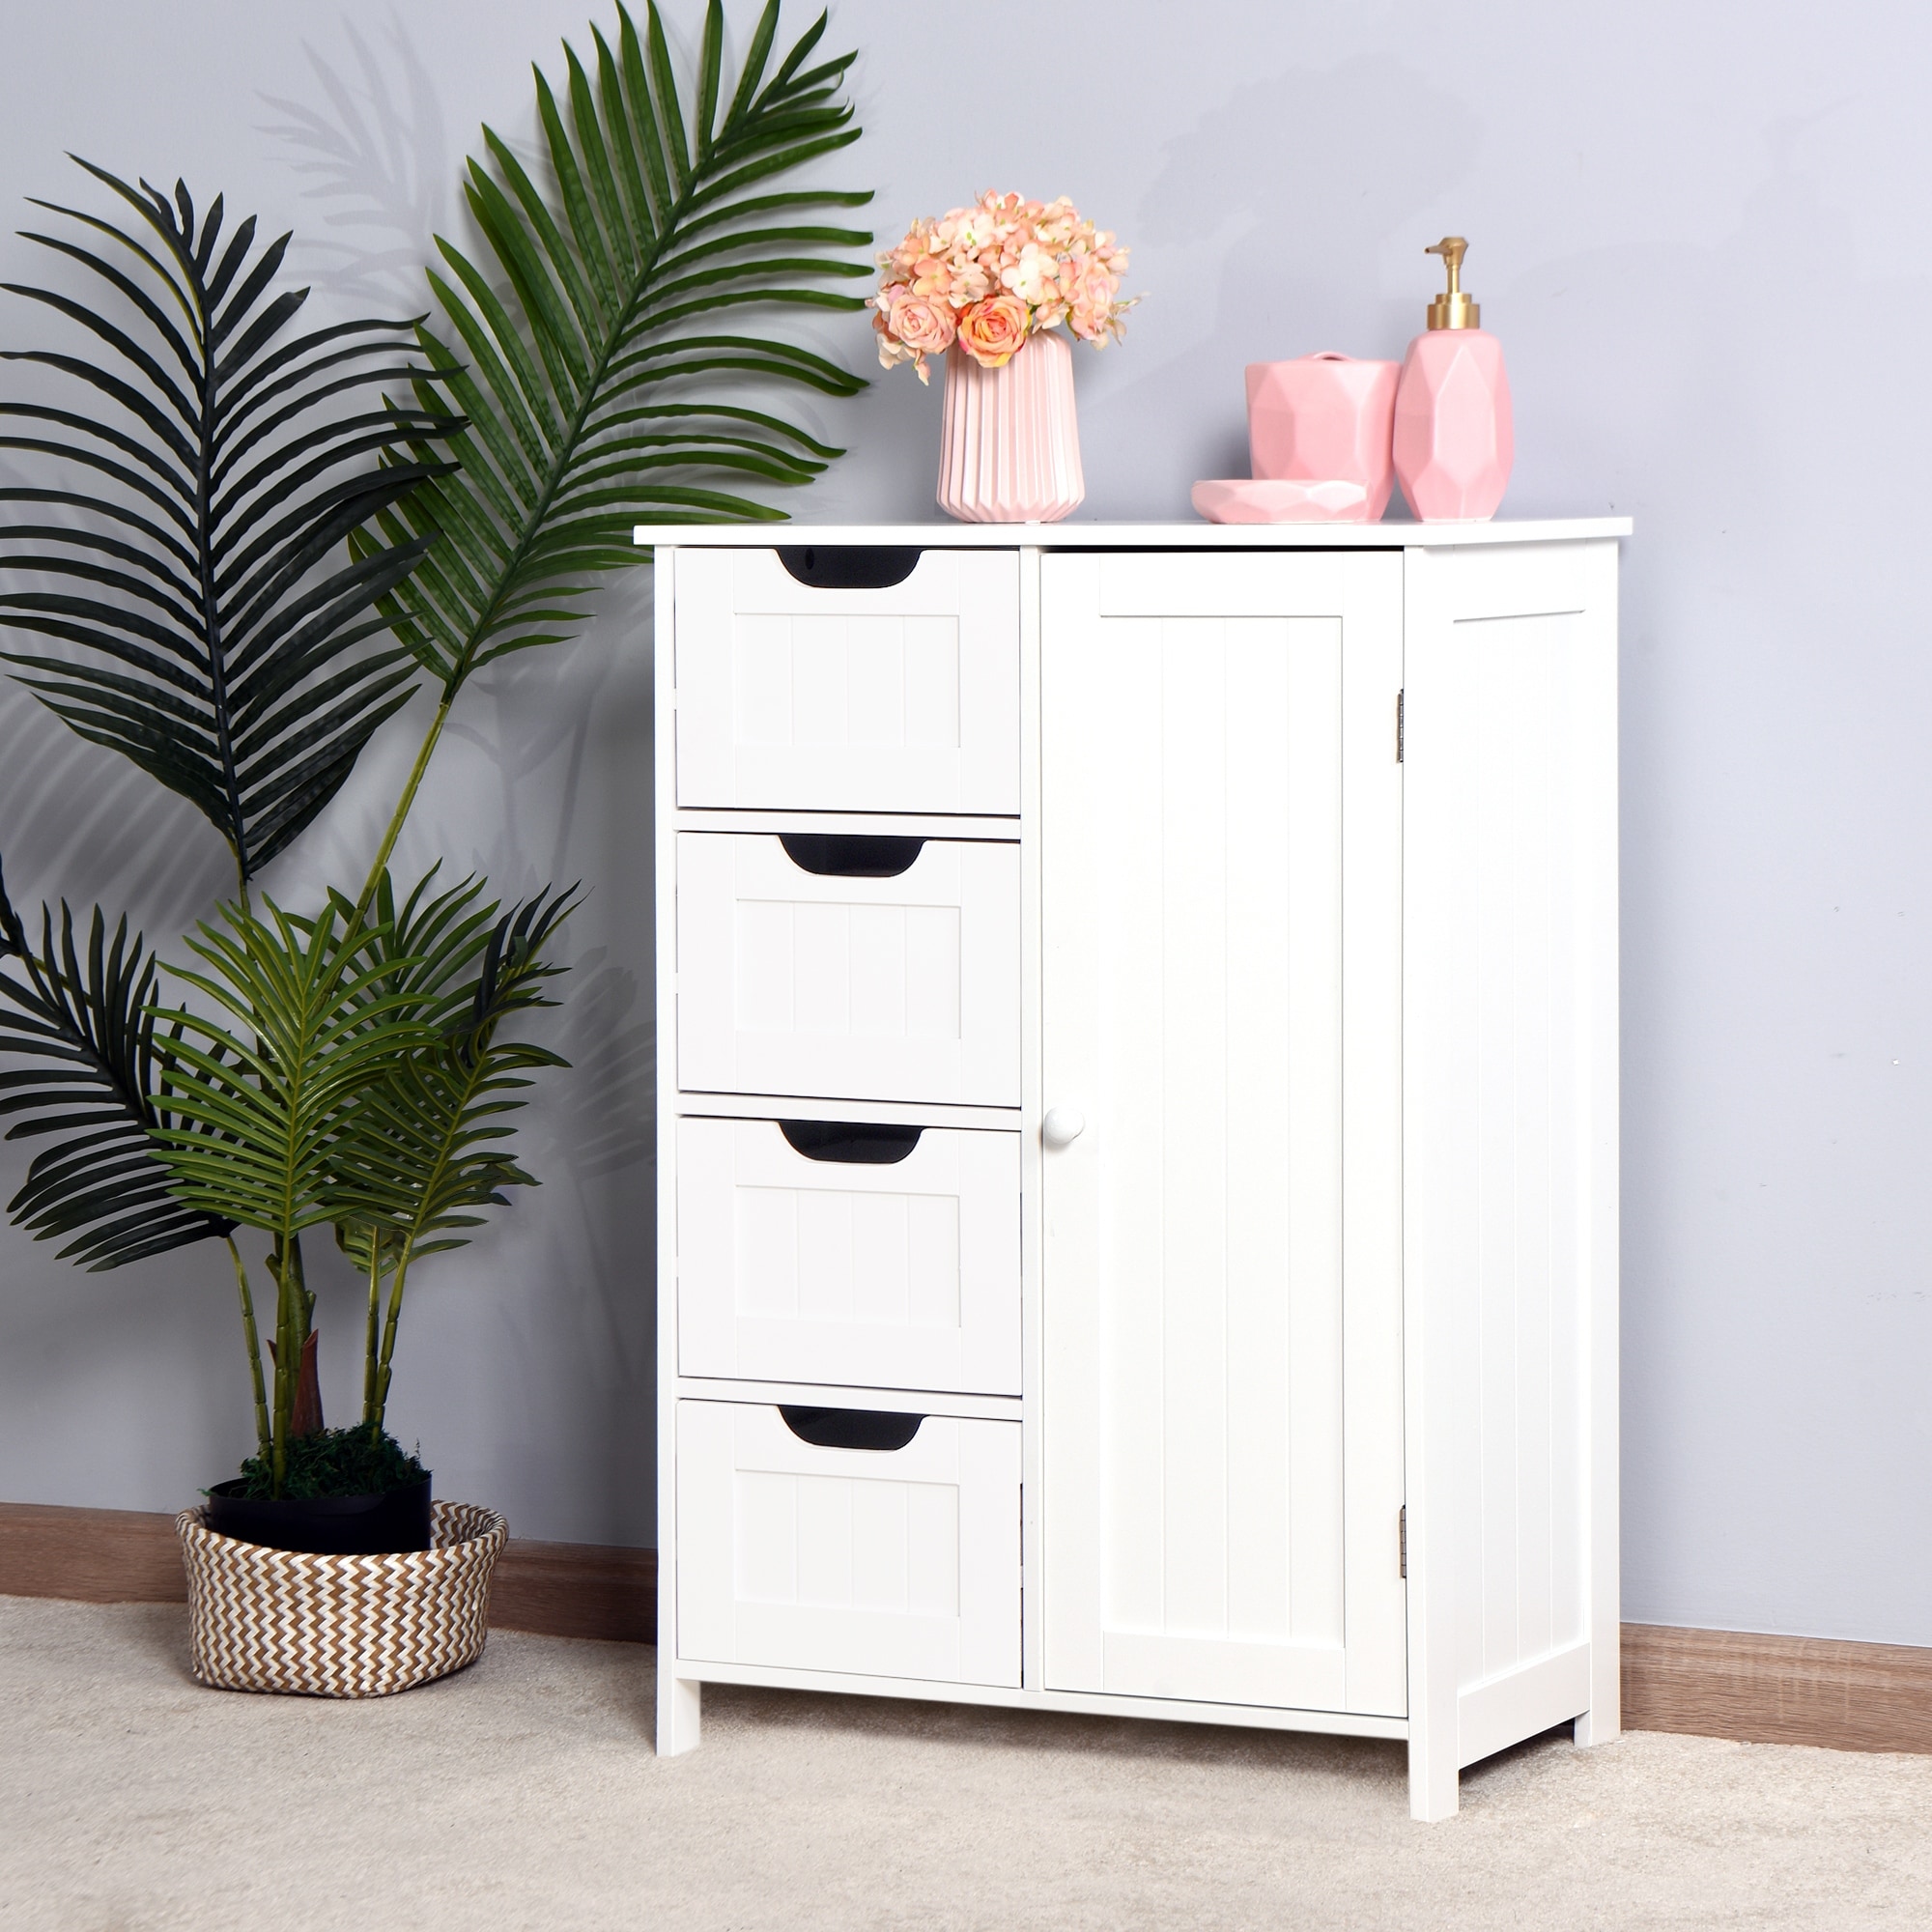 https://ak1.ostkcdn.com/images/products/is/images/direct/4323f6fc12708d2268c41f843355b5110a6b0295/White-Bathroom-Storage-Cabinet-with-Adjustable-Shelf-and-Drawers.jpg